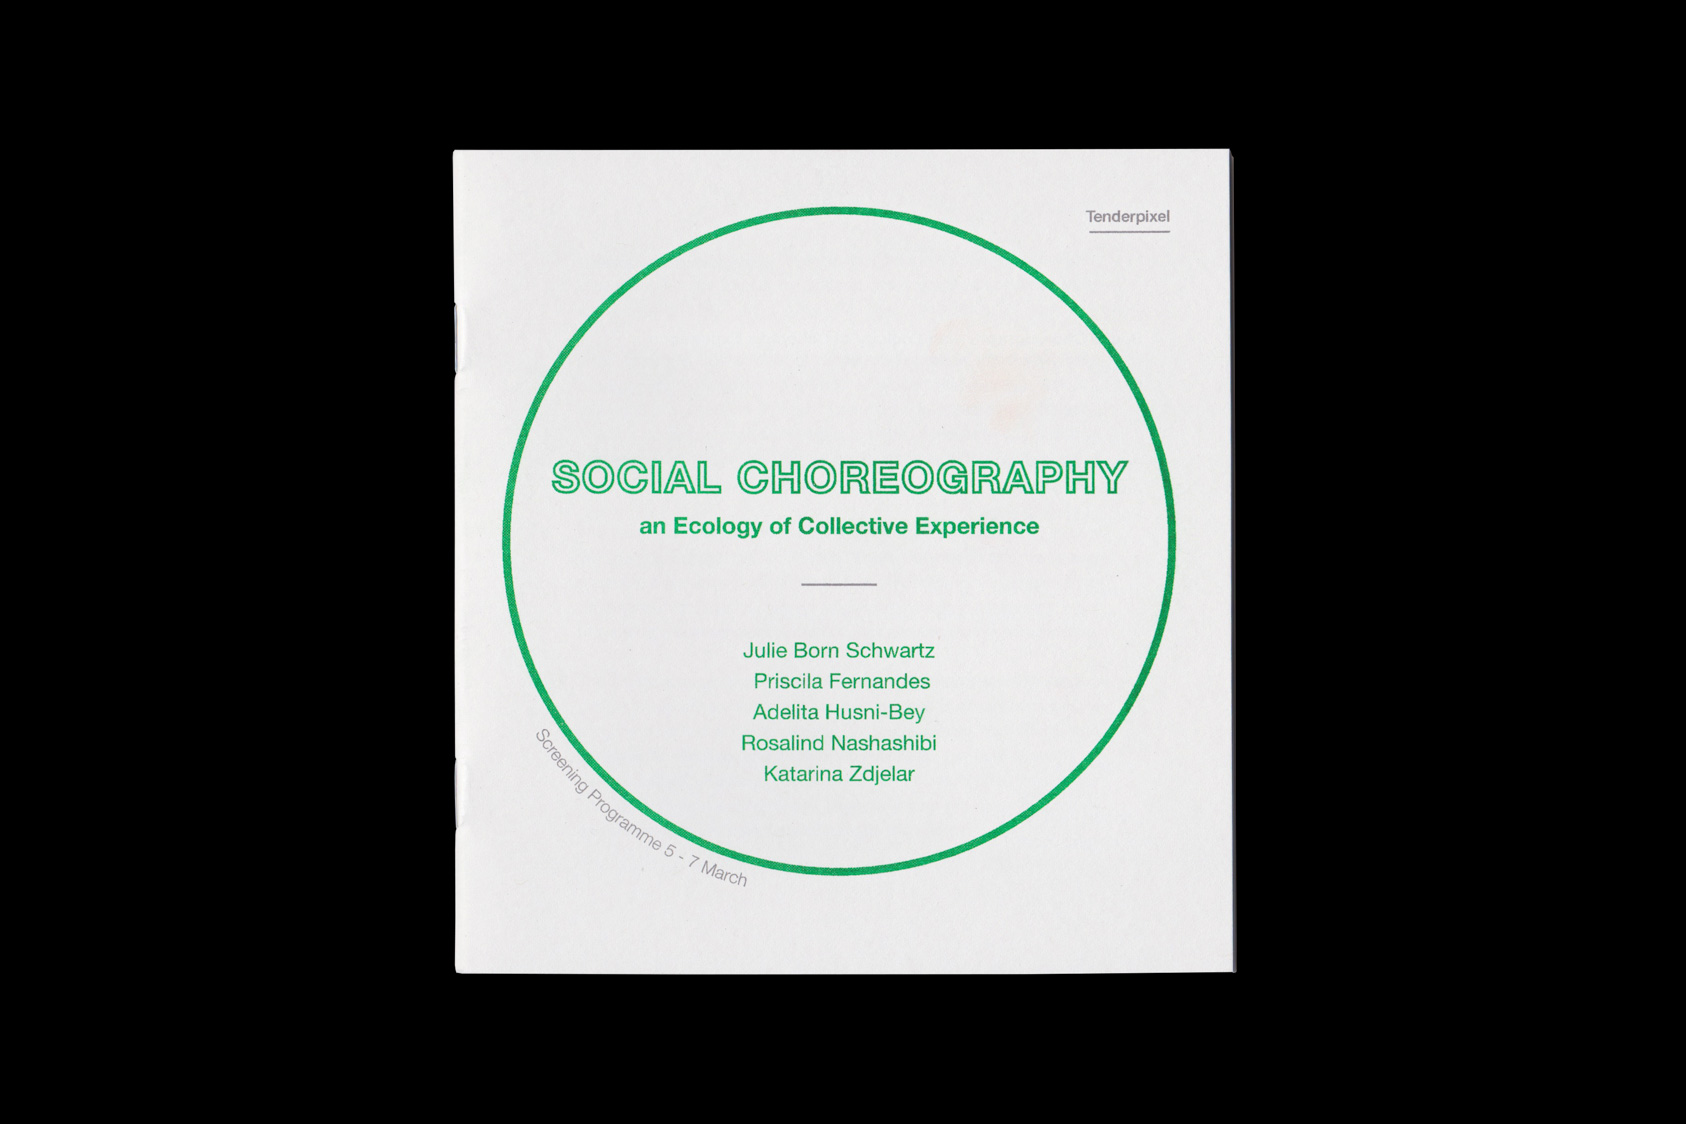 Social Choreography by the agency for emerging ideas